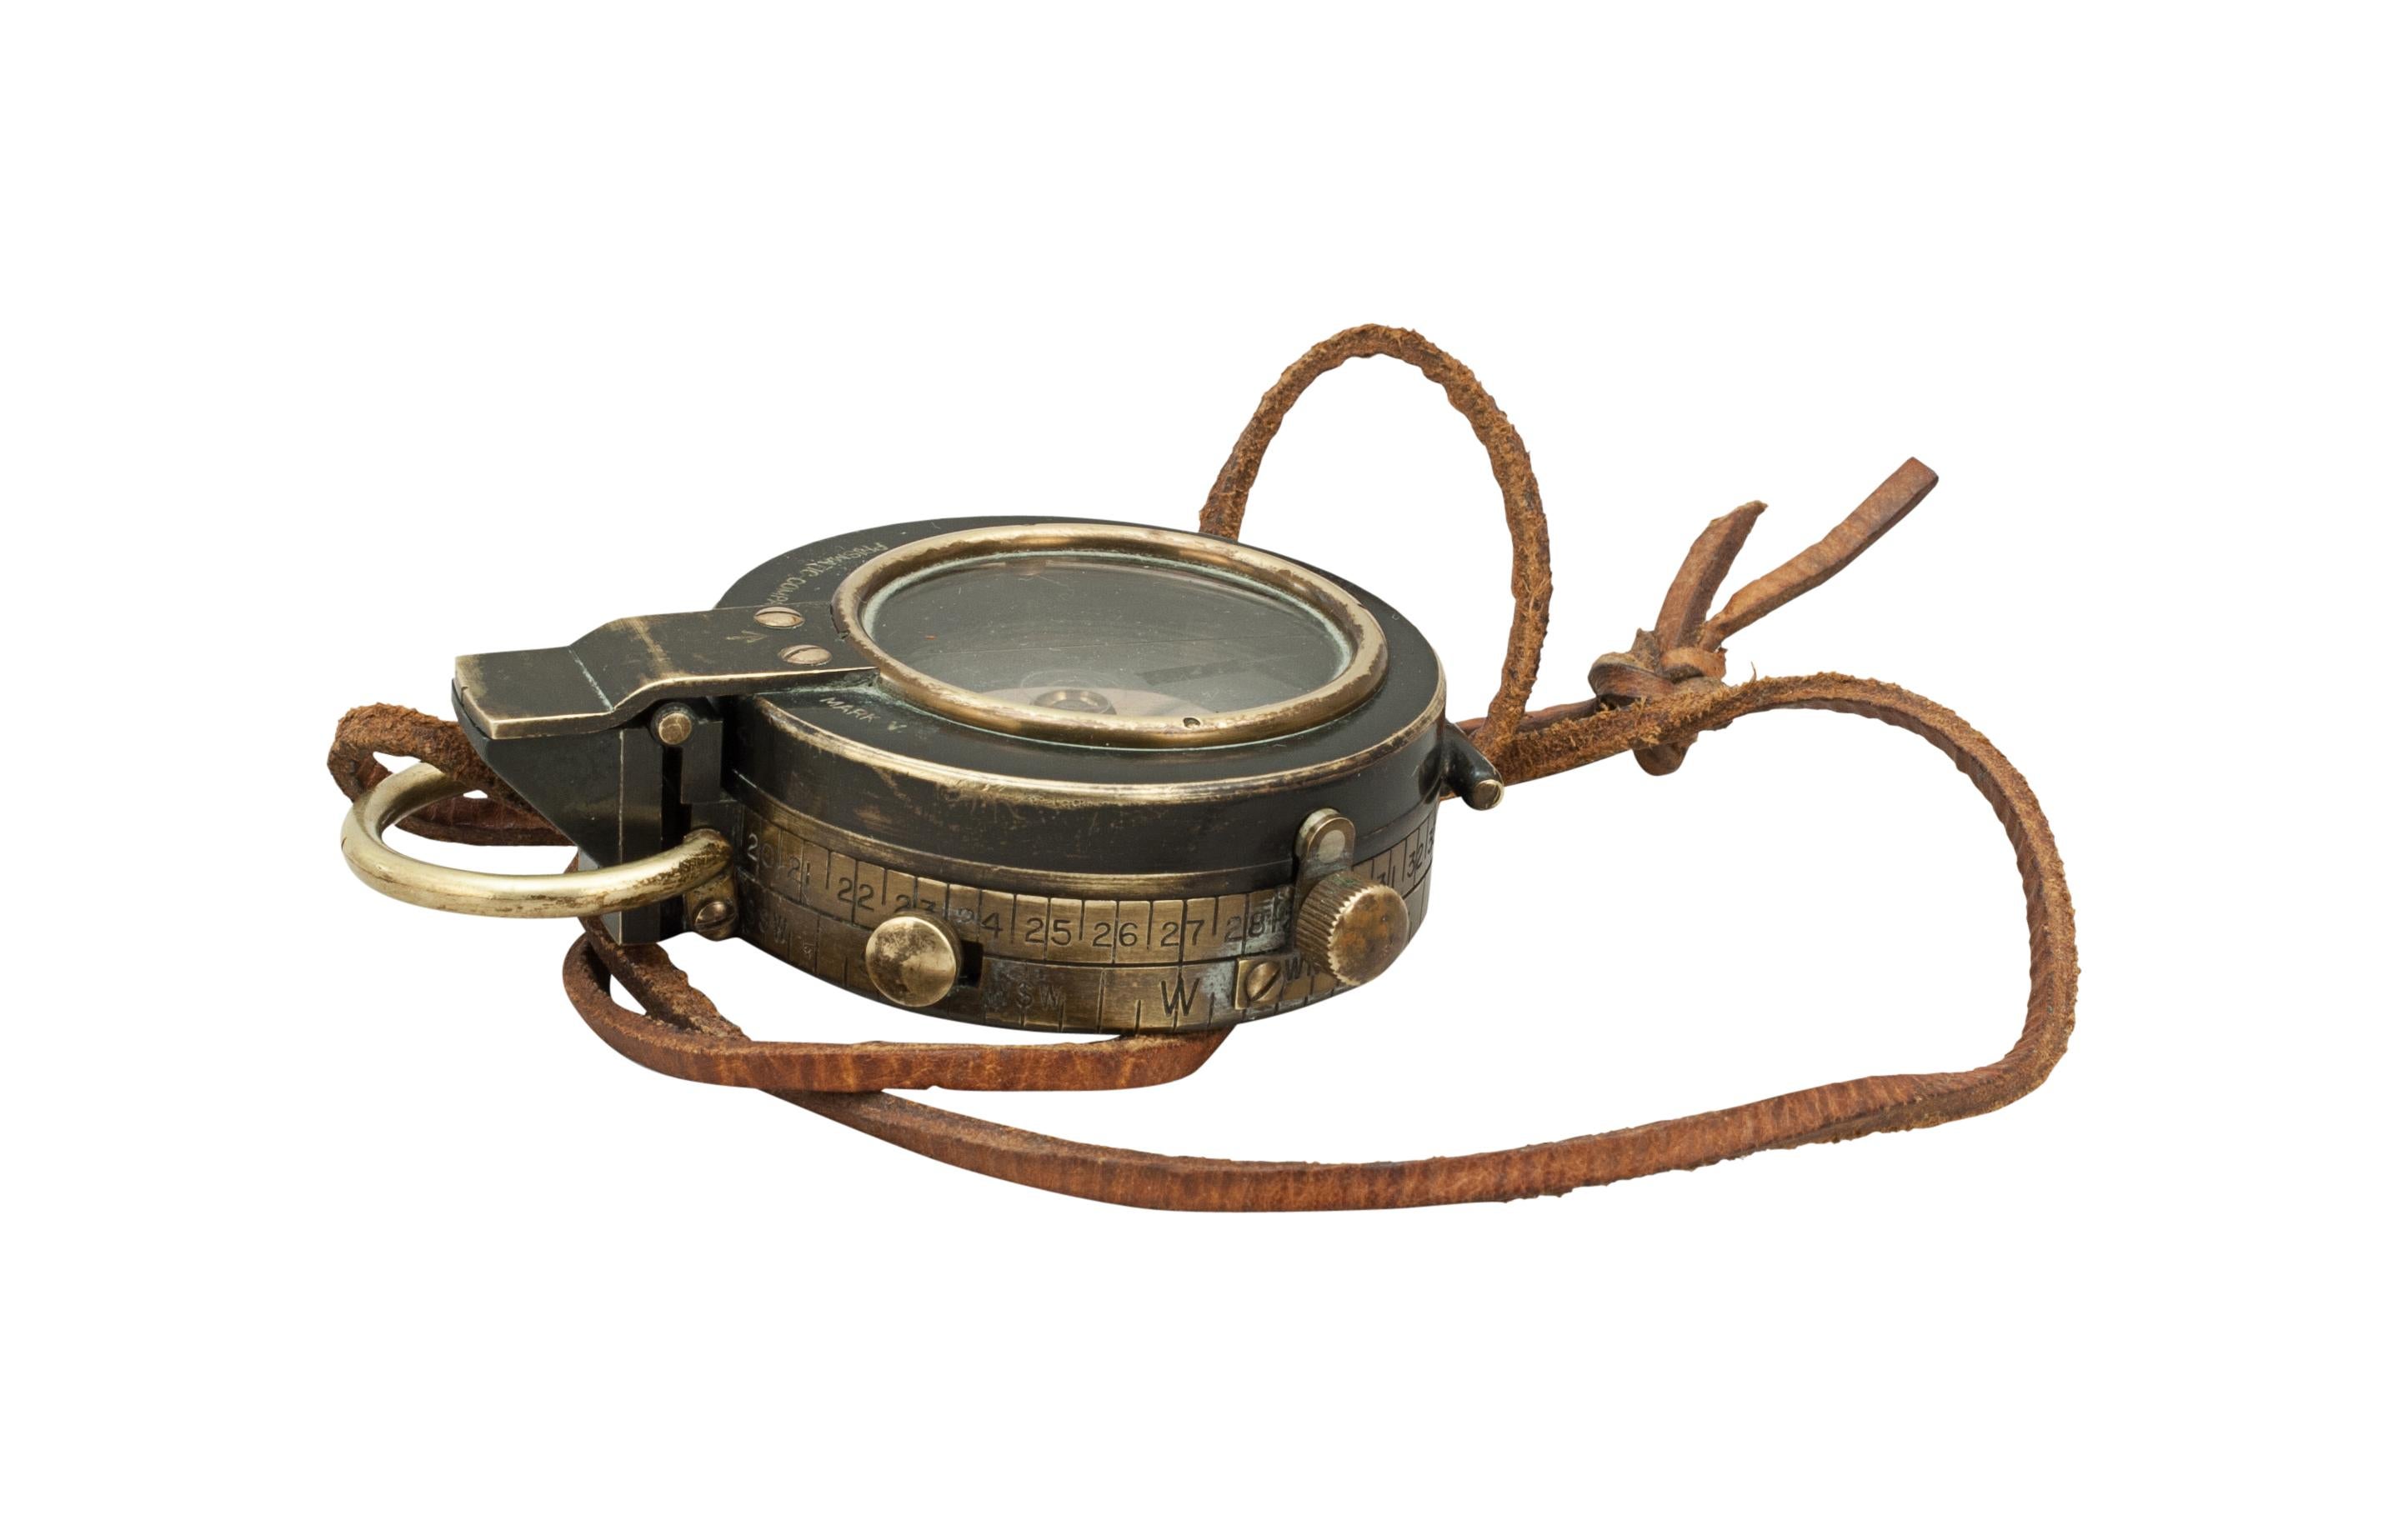 Short & Mason Ltd. Prismatic Mk. V Compass
Military Mk. V Prismatic Compass by Short & Mason Ltd.
The compass has a brass body and lid with original black finish, the glass lid having a sighting hairline and the lid lifting tab with aiming notch.